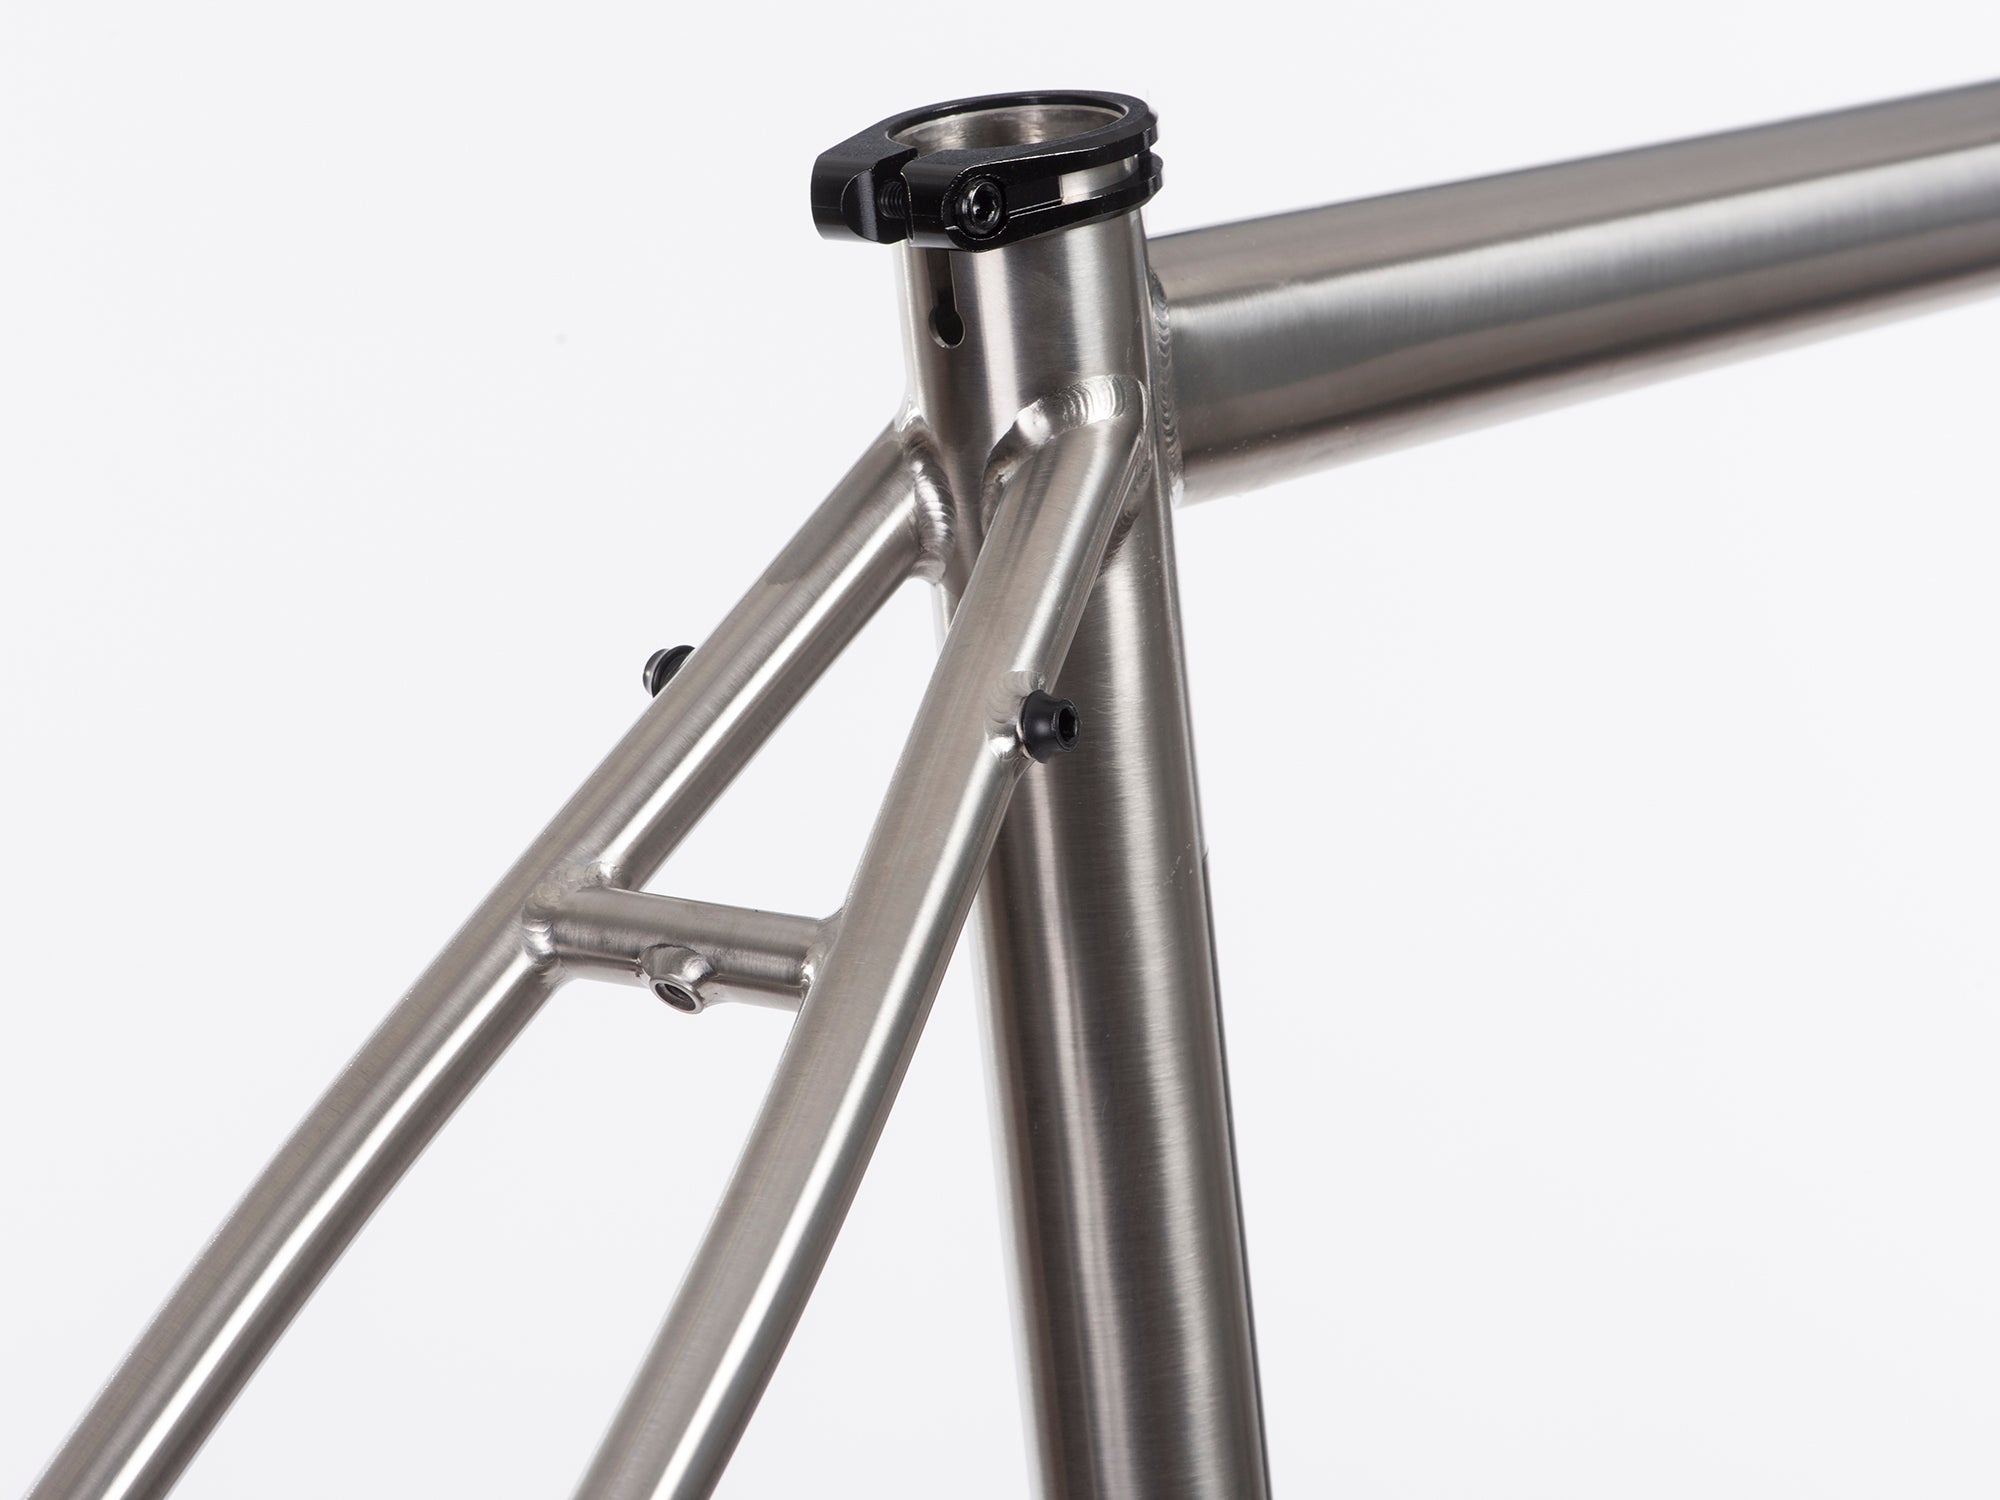 Brushed titanium seat post and close up of seat stays.